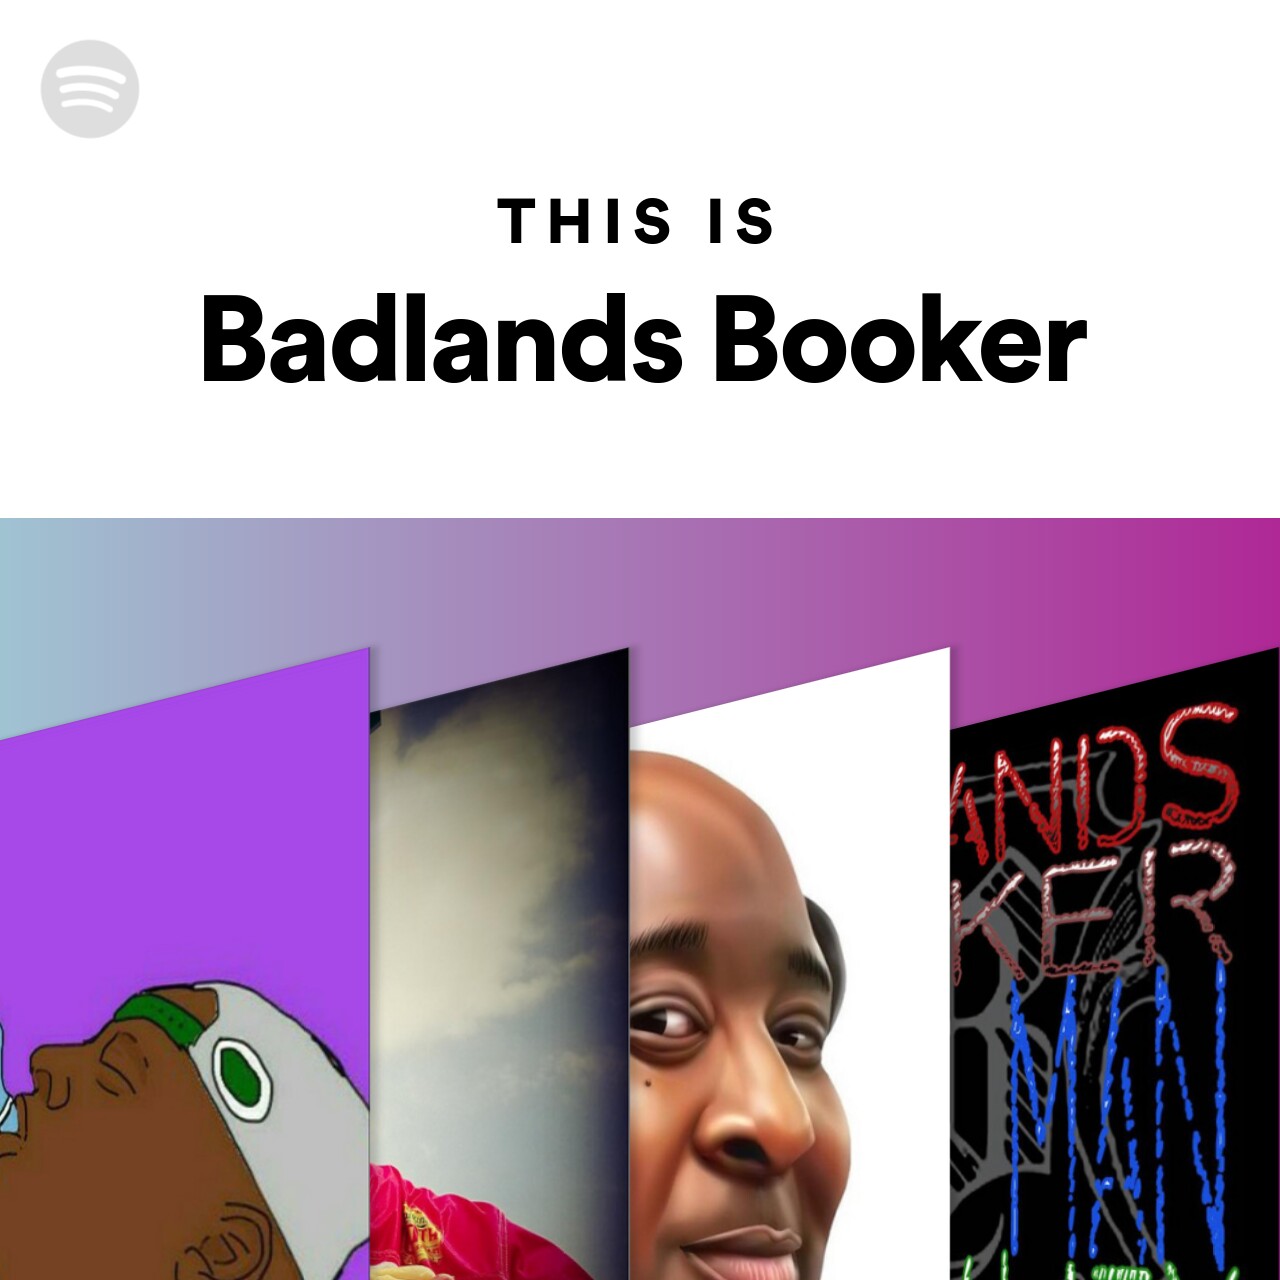 This Is Badlands Booker